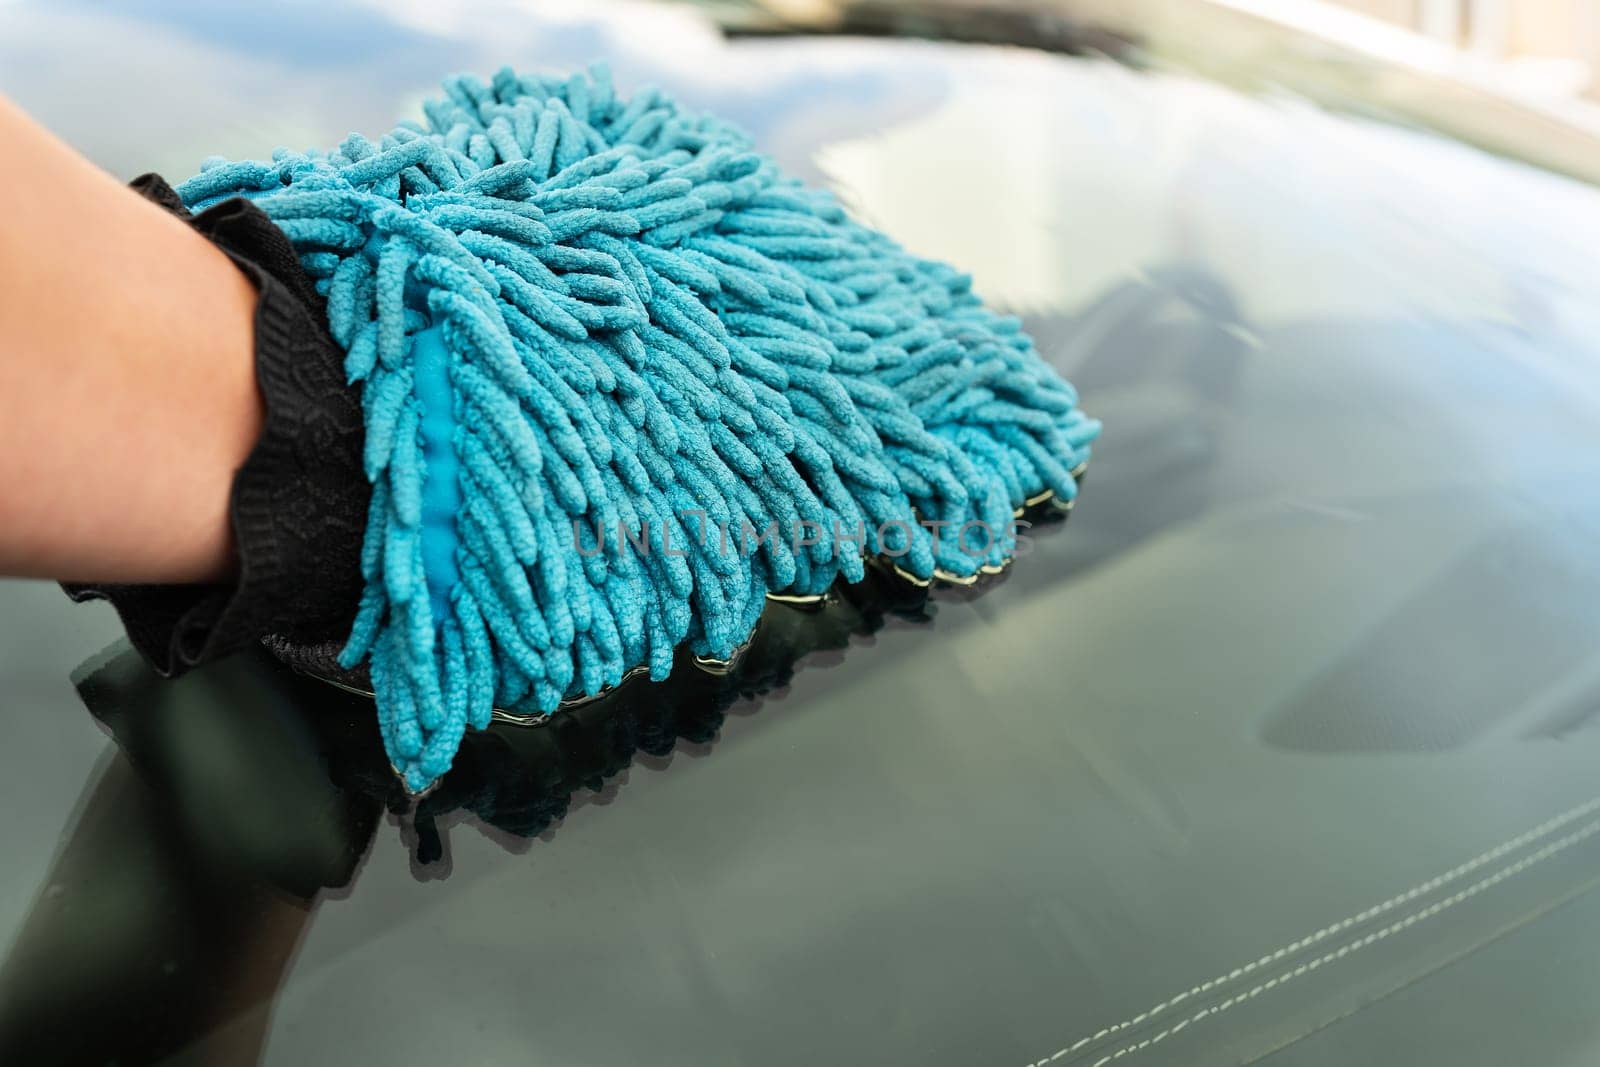 Car wash and self-service concept. A man washes the car windshield with a large blue washcloth